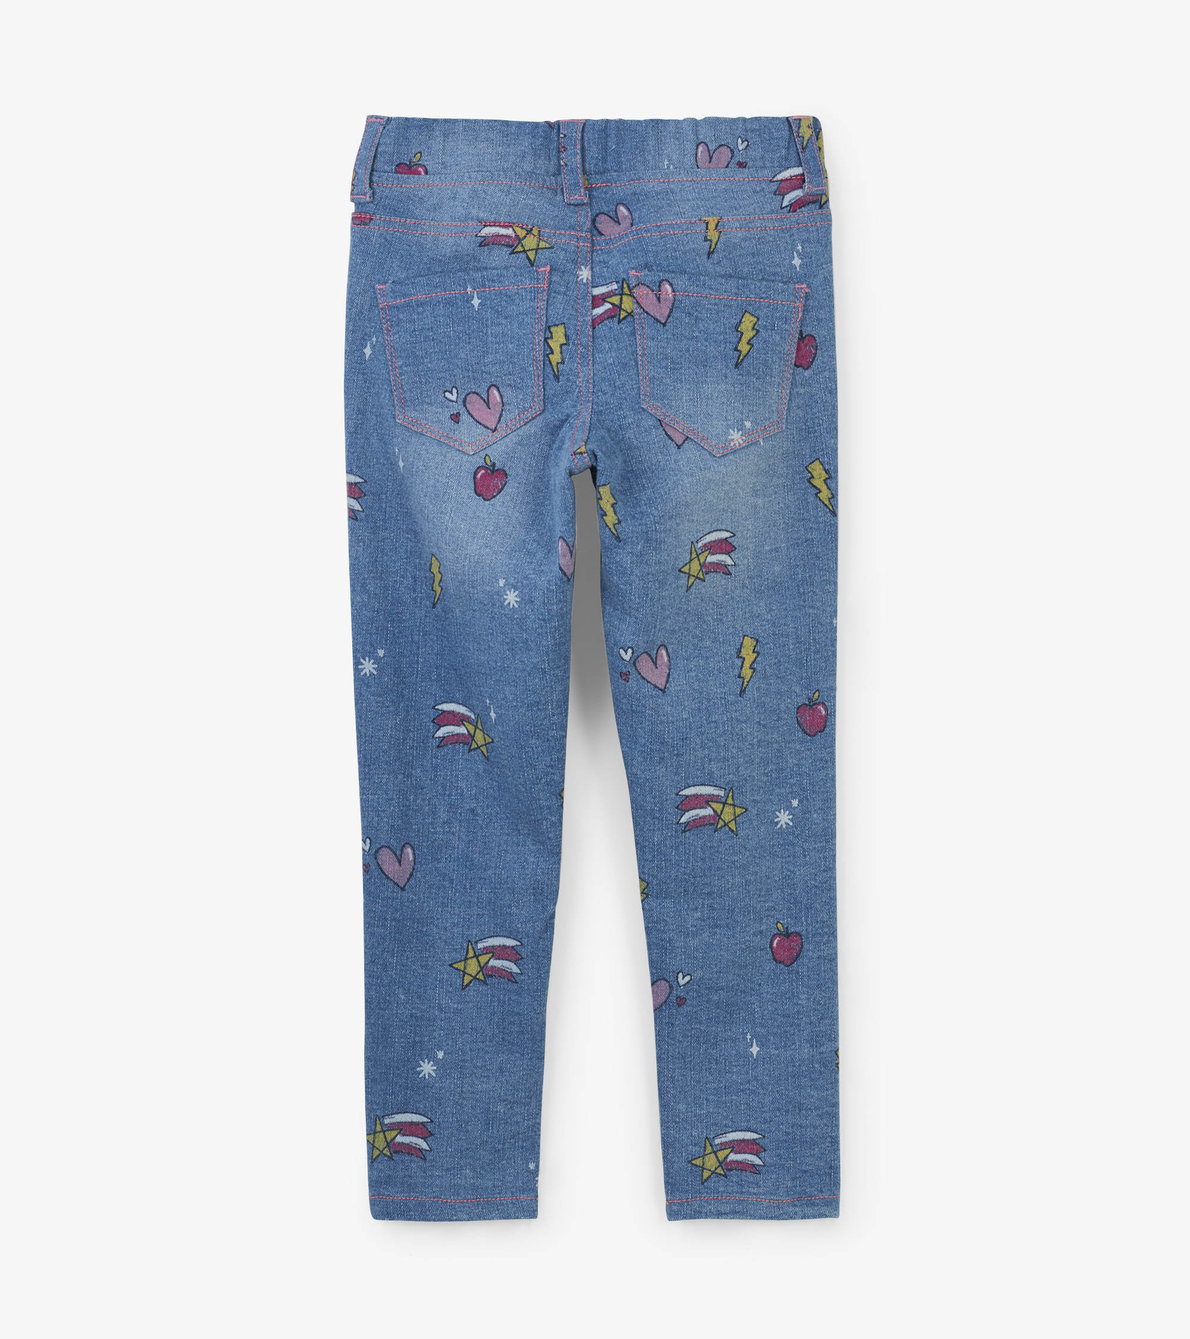 View larger image of Girly Doodles Stretch Denim Pants